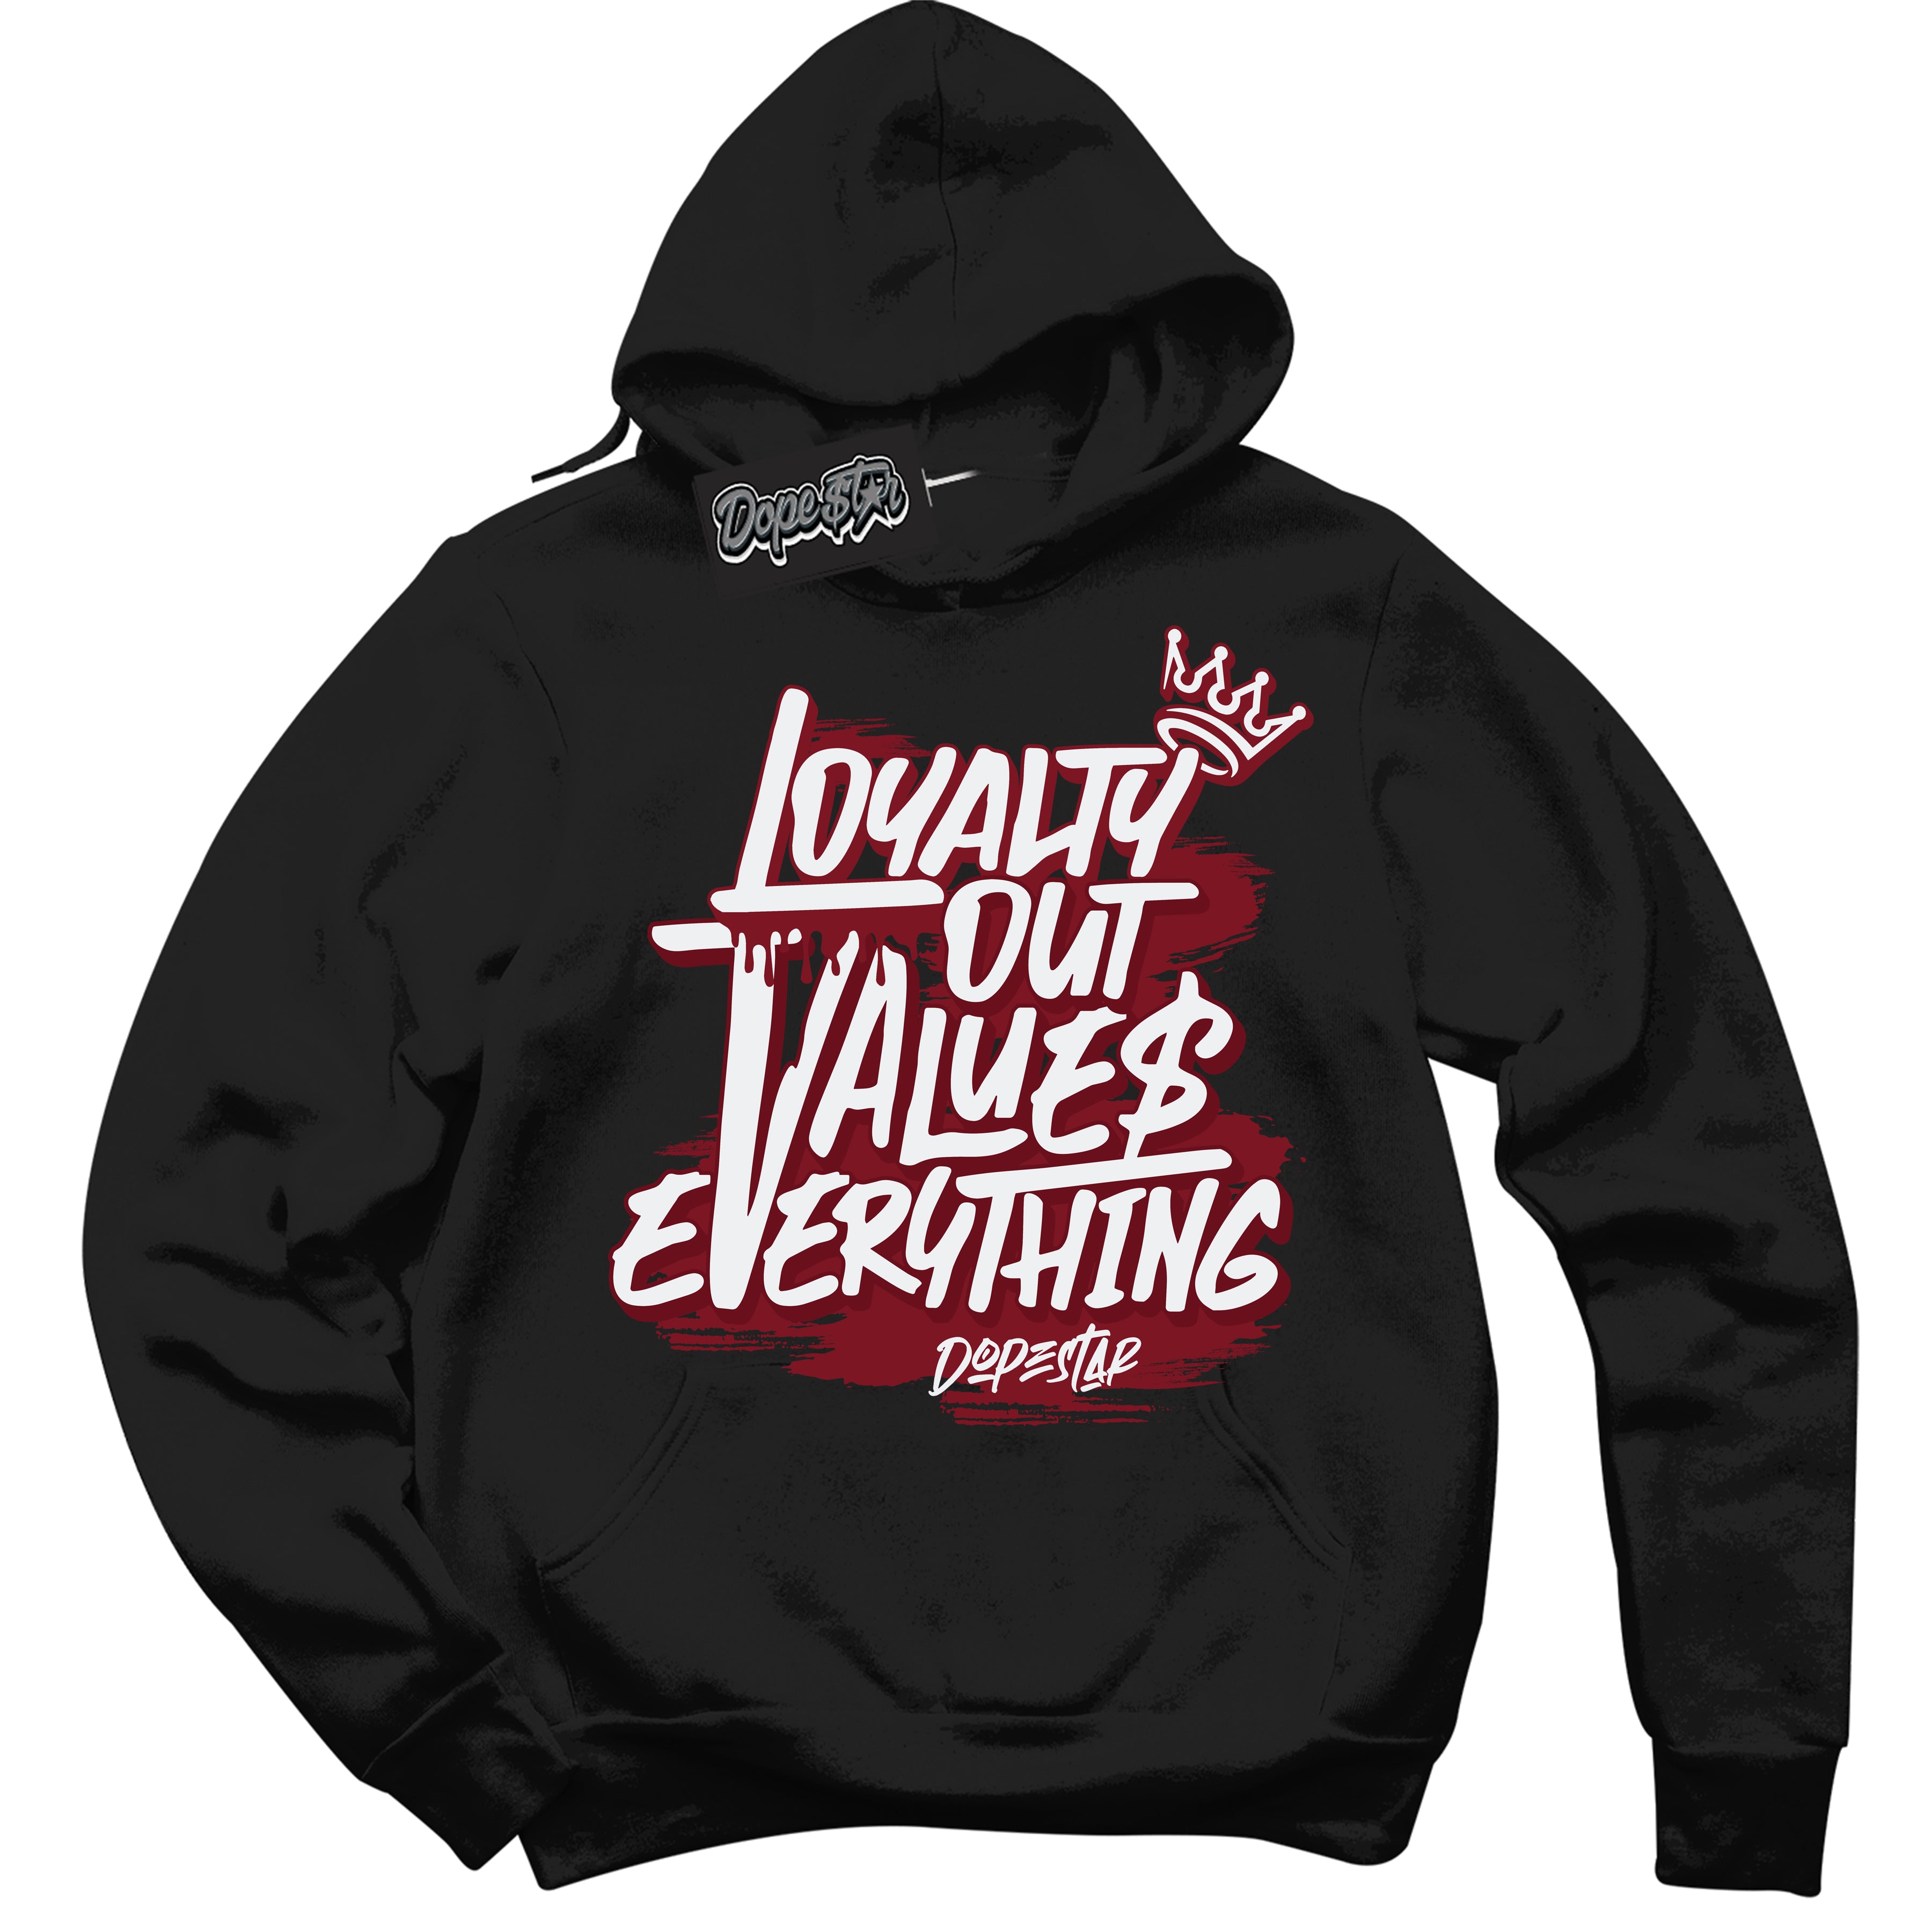 Cool Black Hoodie with “ Loyalty Out Values Everything ”  design that Perfectly Matches  Metallic Burgundy 1s Sneakers.